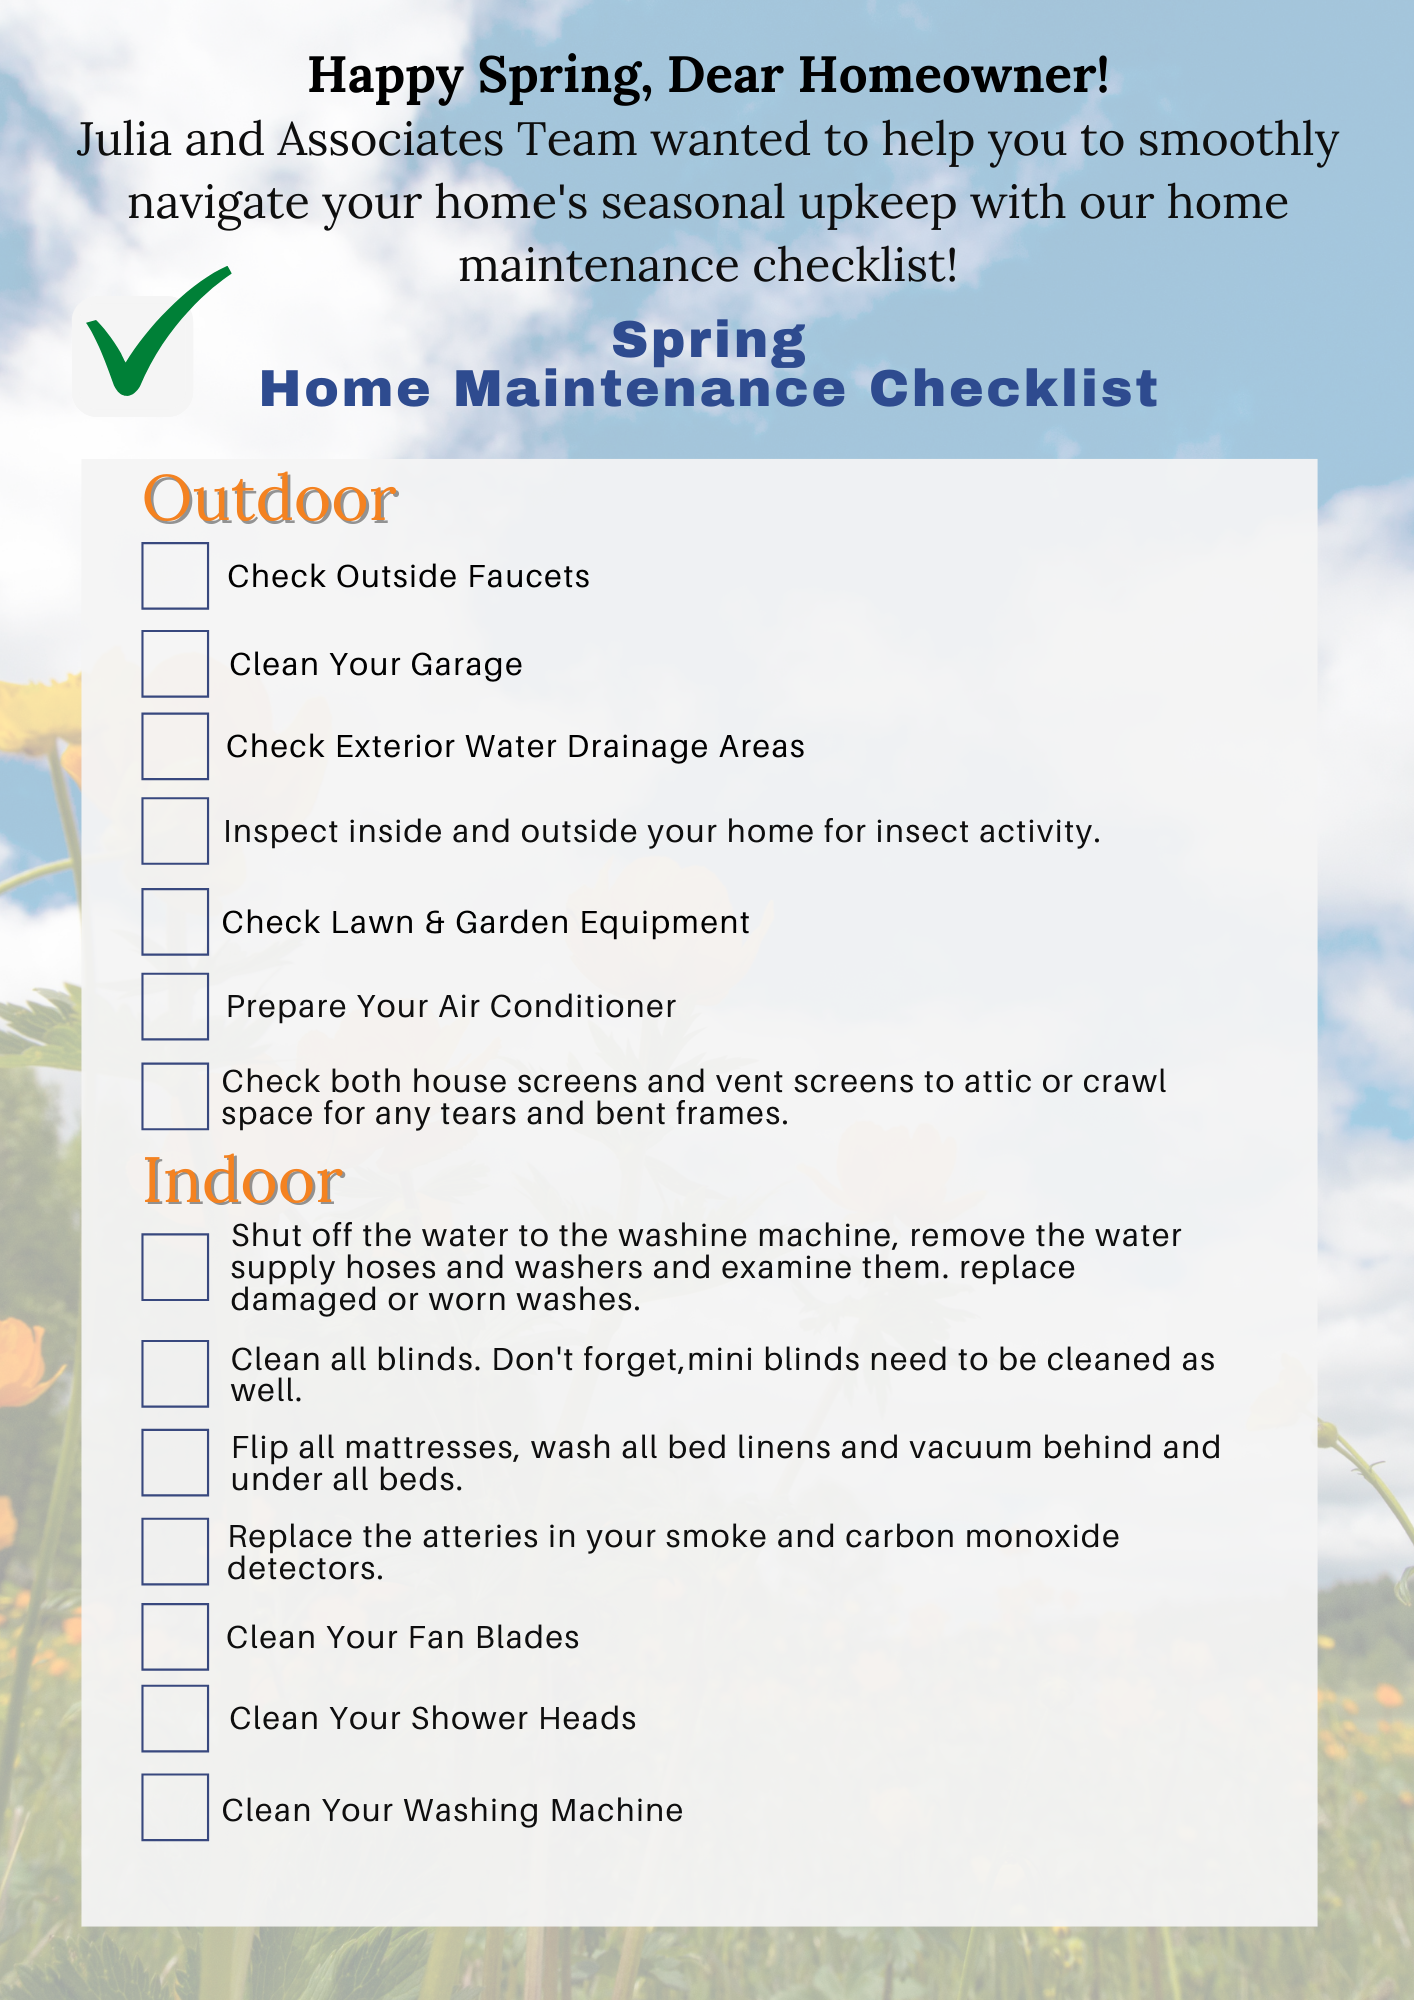 Spring List to do from julia and Associates Team